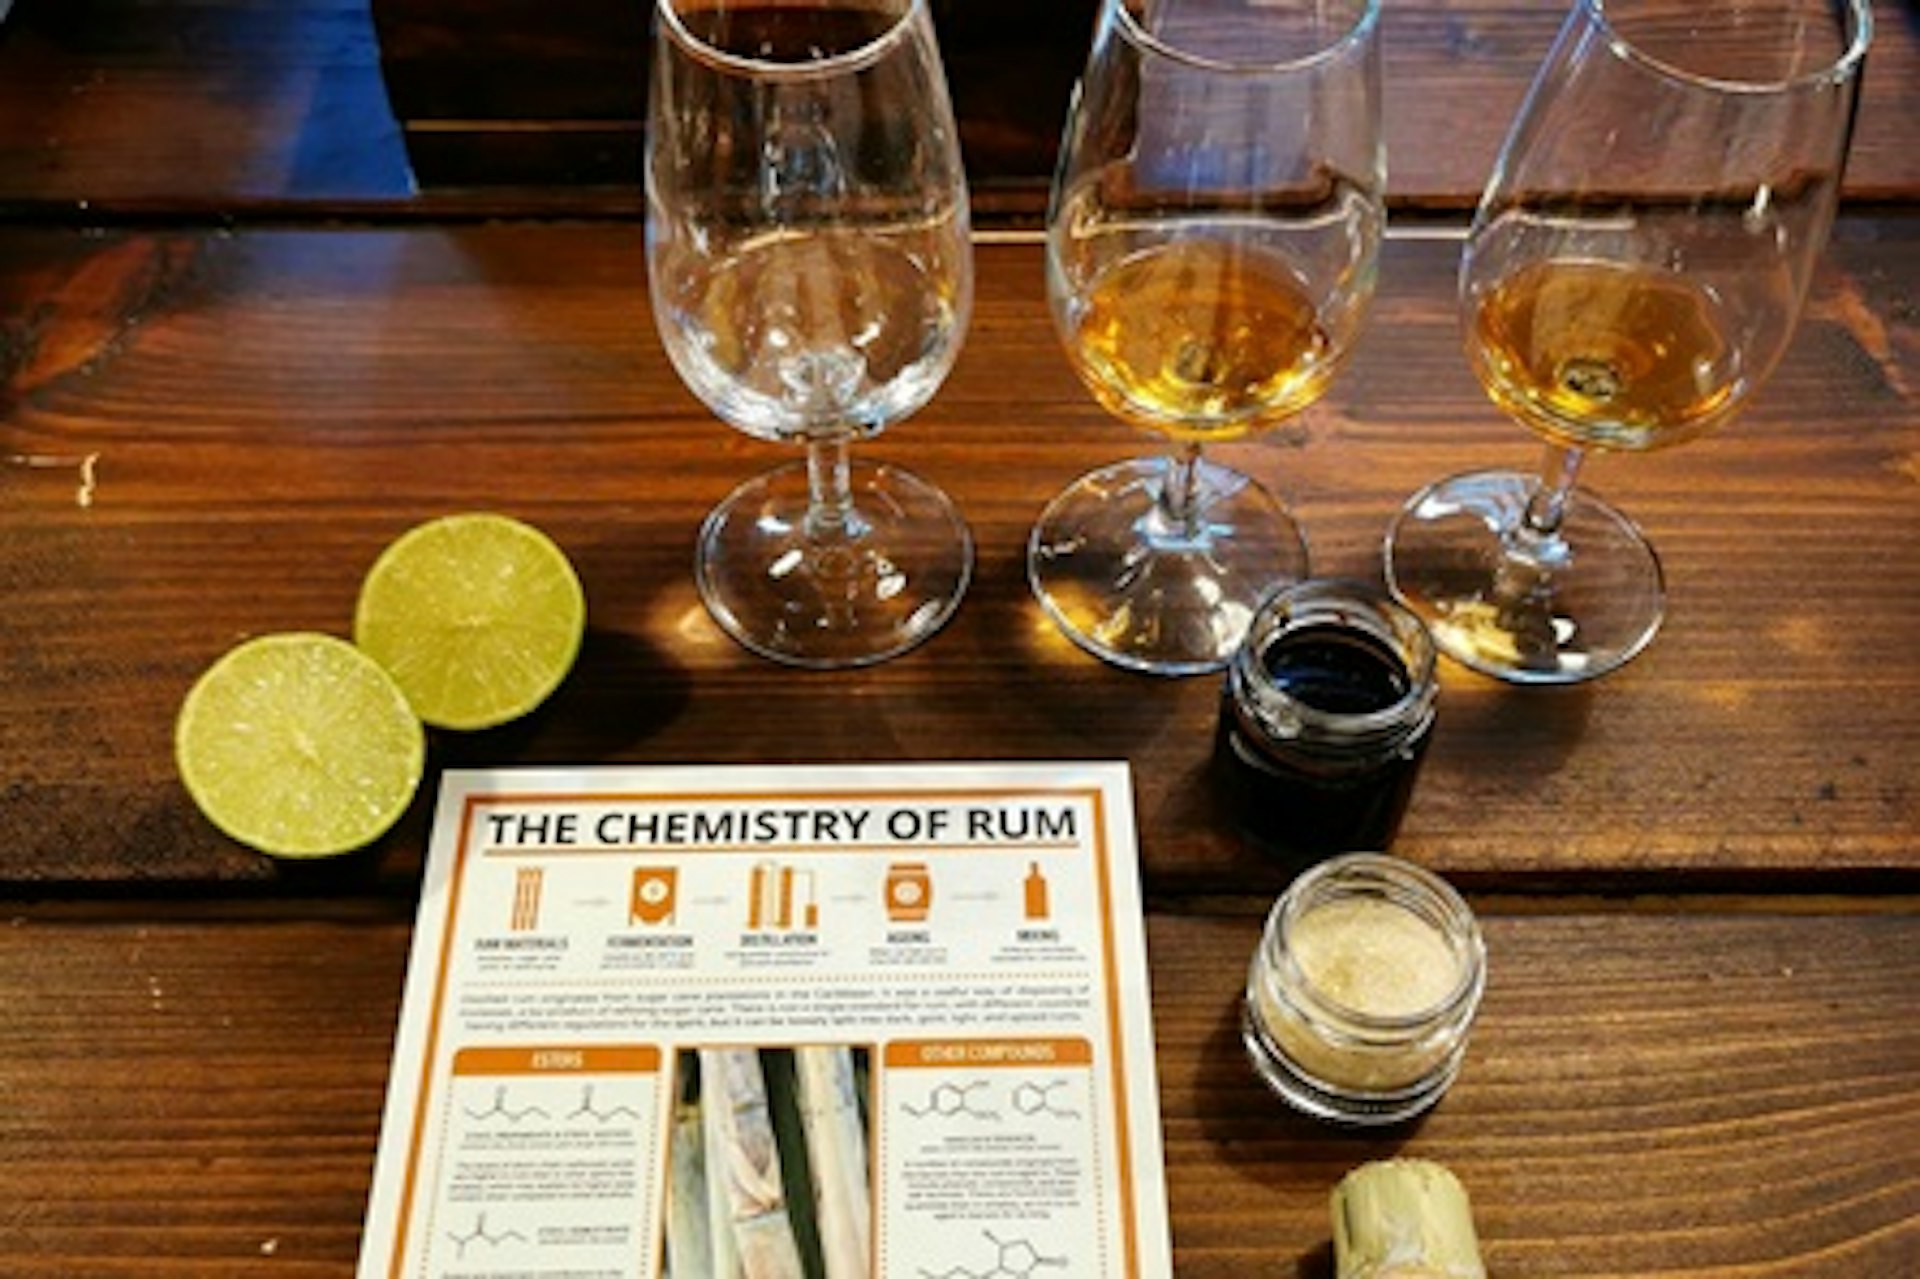 Spiced Rum Creation Class with Unlimited Rum and Ginger Beer for Two at The Liquor Studio 4